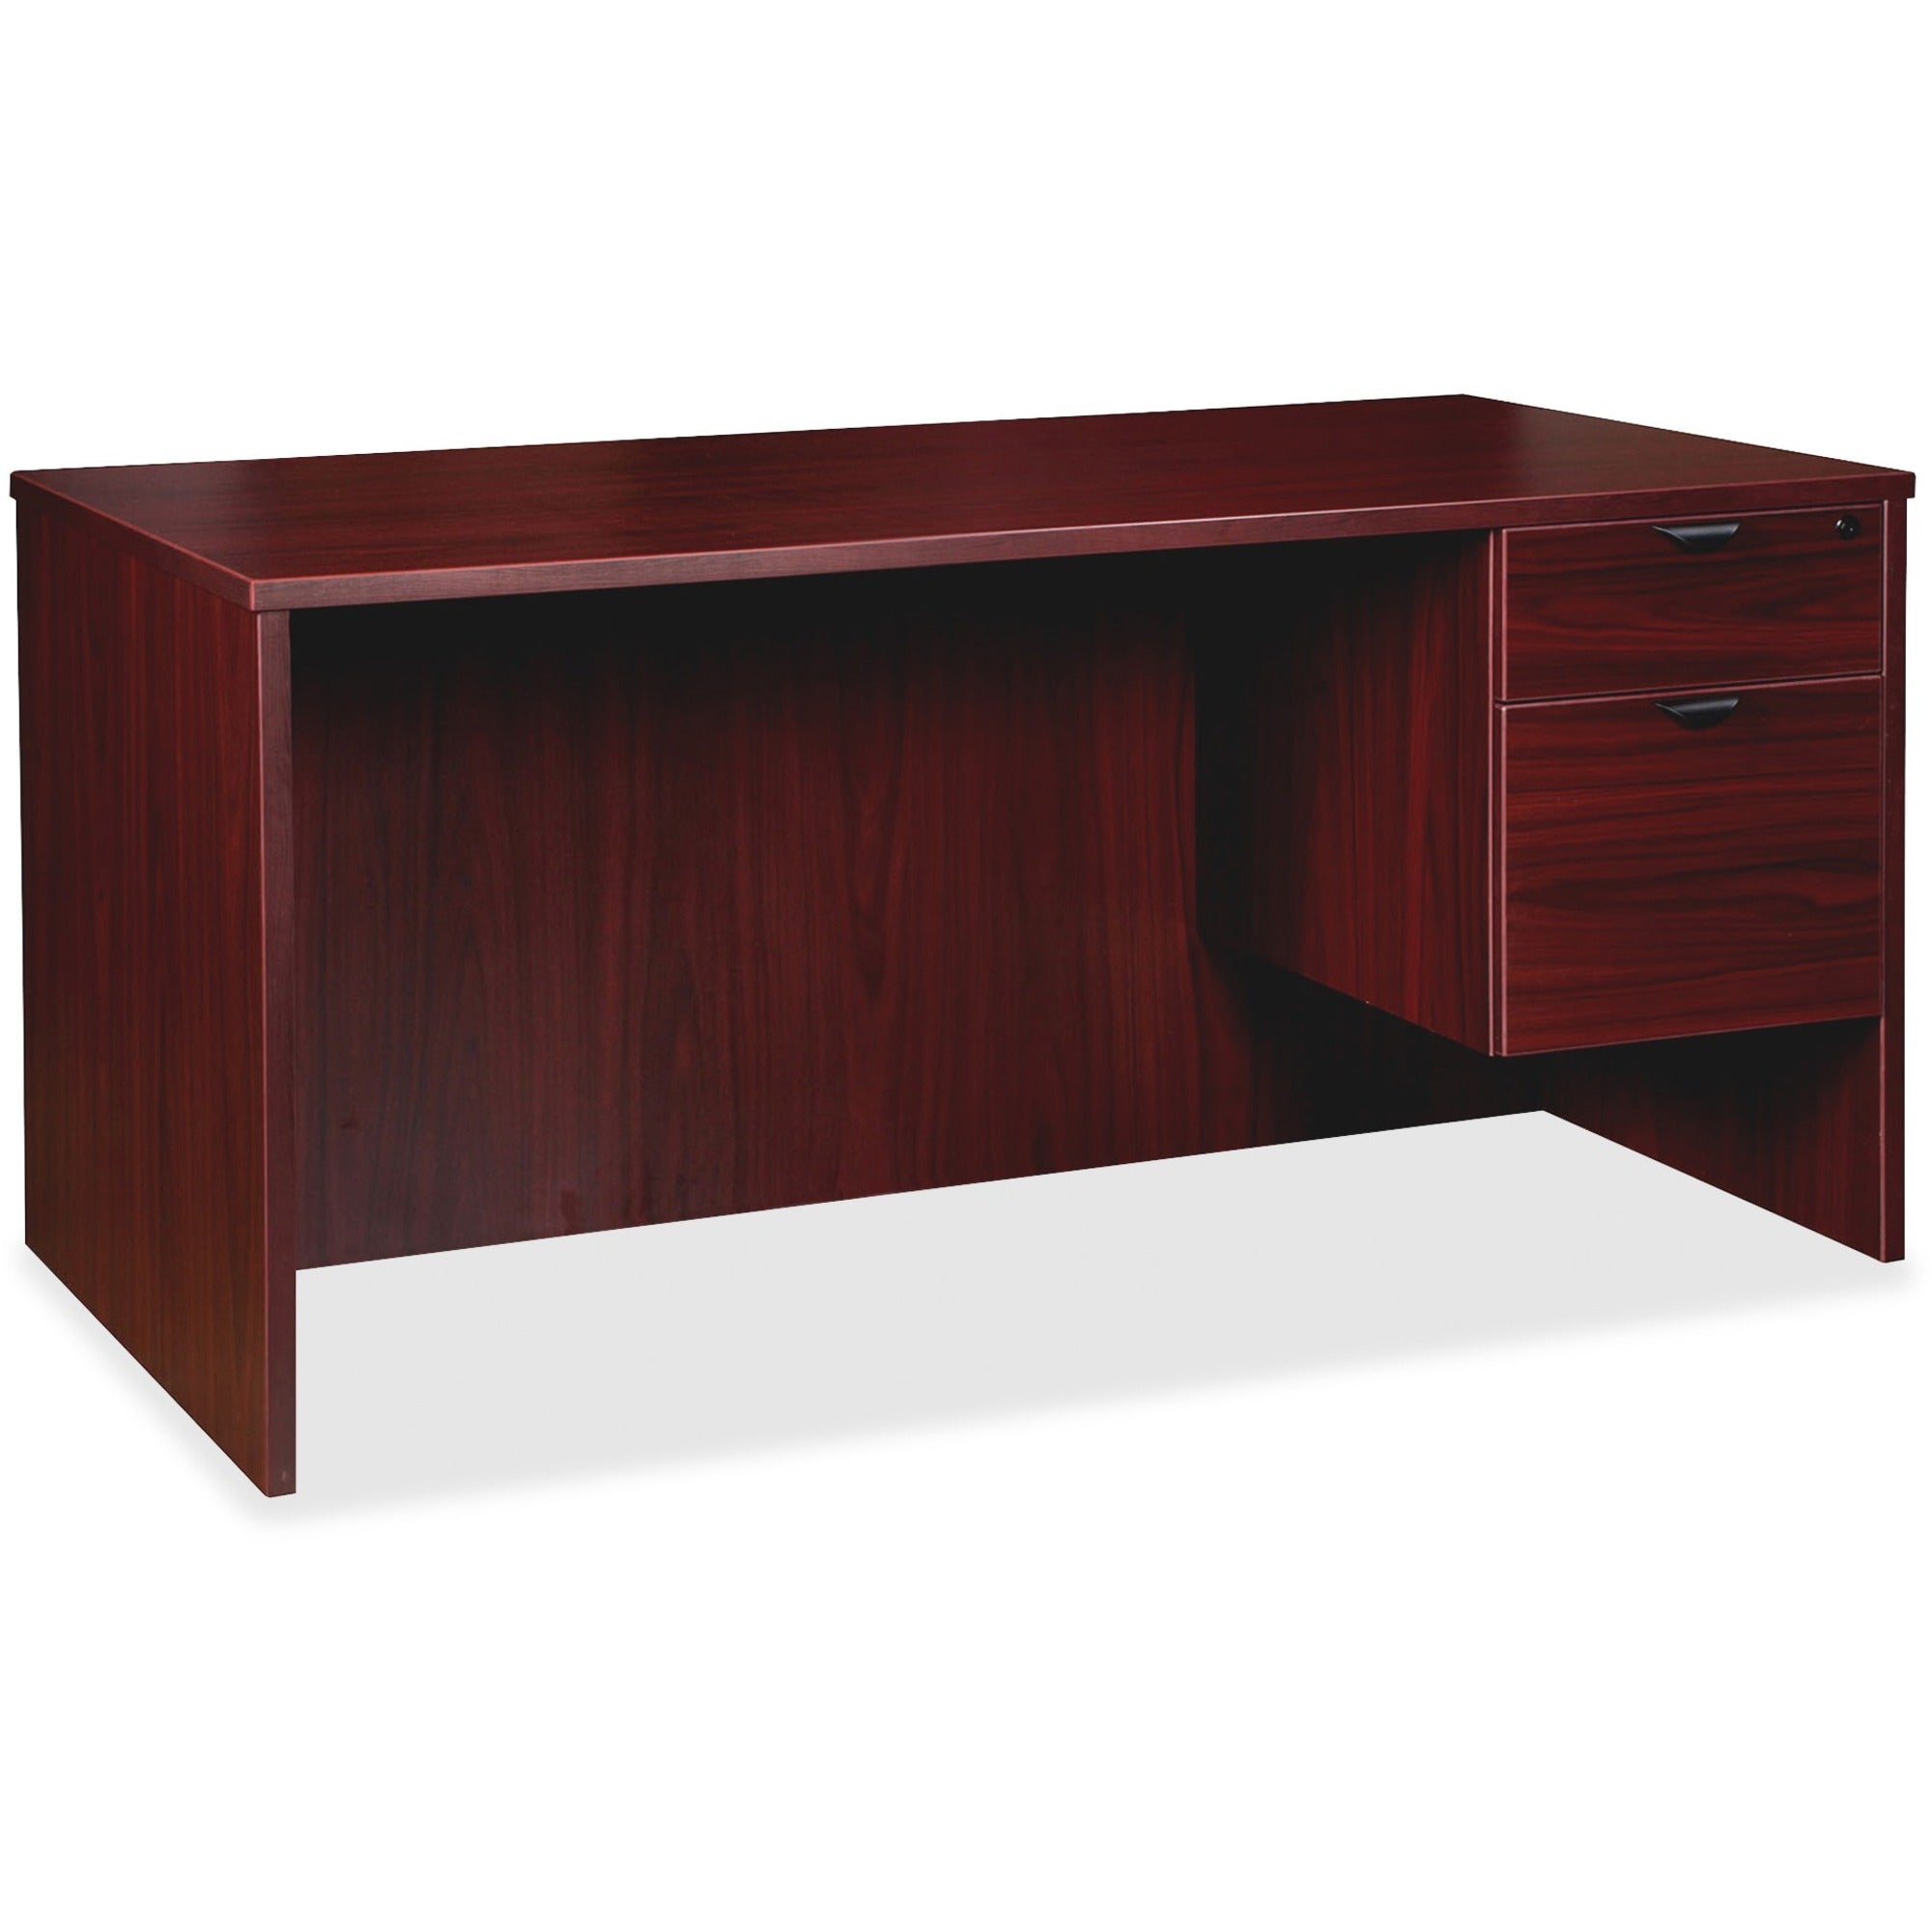 lorell-prominence-20-3-4-right-pedestal-desk-1-top-66-x-3029-2-x-file-box-drawers-single-pedestal-on-right-side-band-edge-material-particleboard-finish-mahogany-laminate-thermofused-melamine-tfm_llrpd3066qrmy - 1